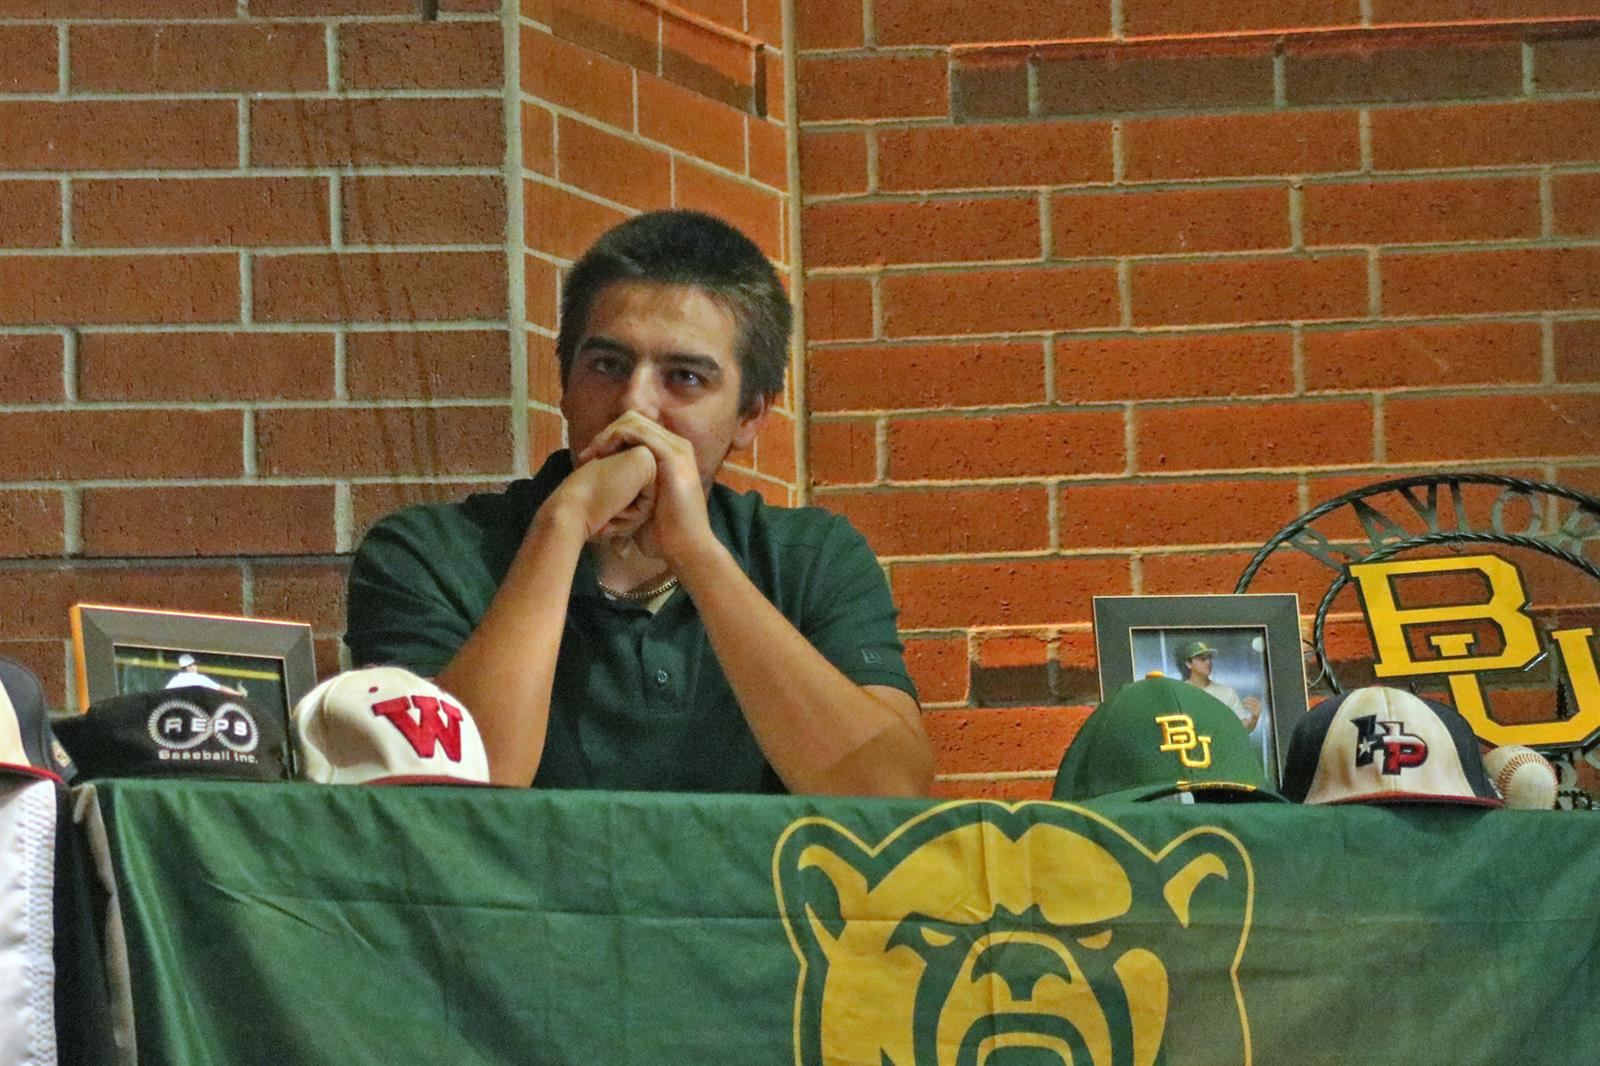 Cypress Woods High School senior Mason Green signed a letter of intent to play baseball at Baylor University.